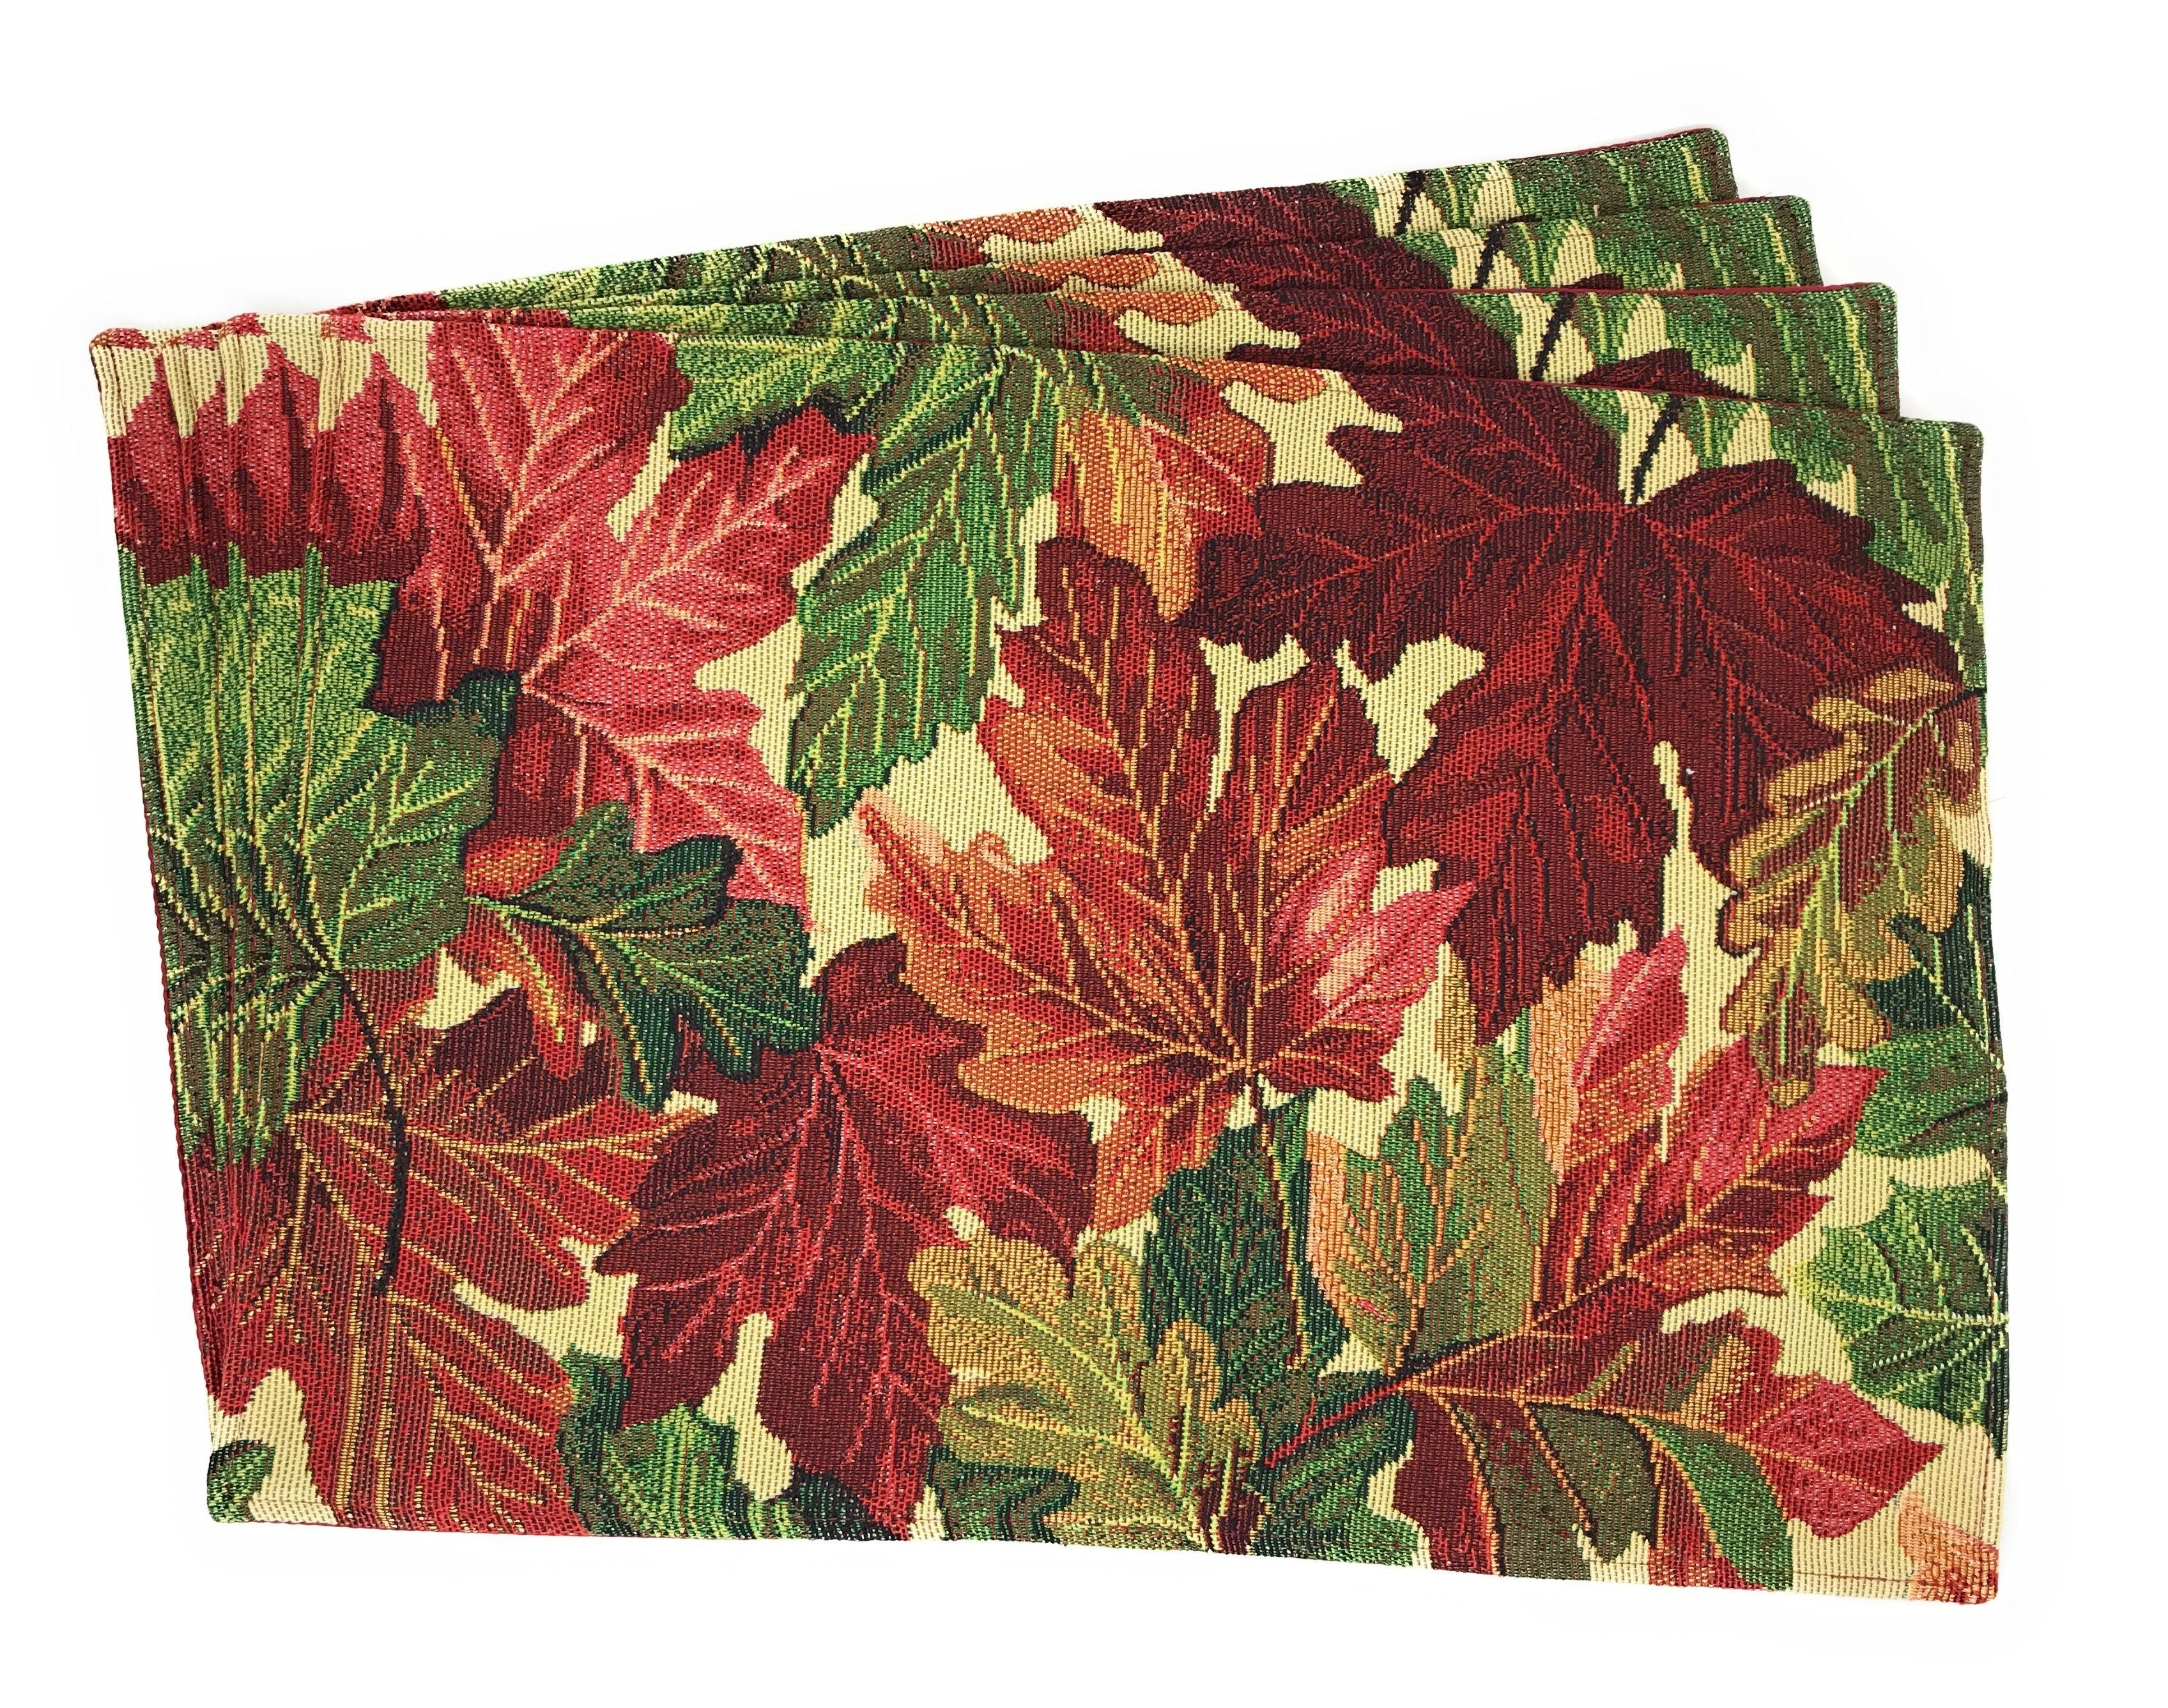 Tache Thanksgiving Leaves Red Orange Fall Foliage Tapestry Placemat Set of 4 (11516PM) - Tache Home Fashion